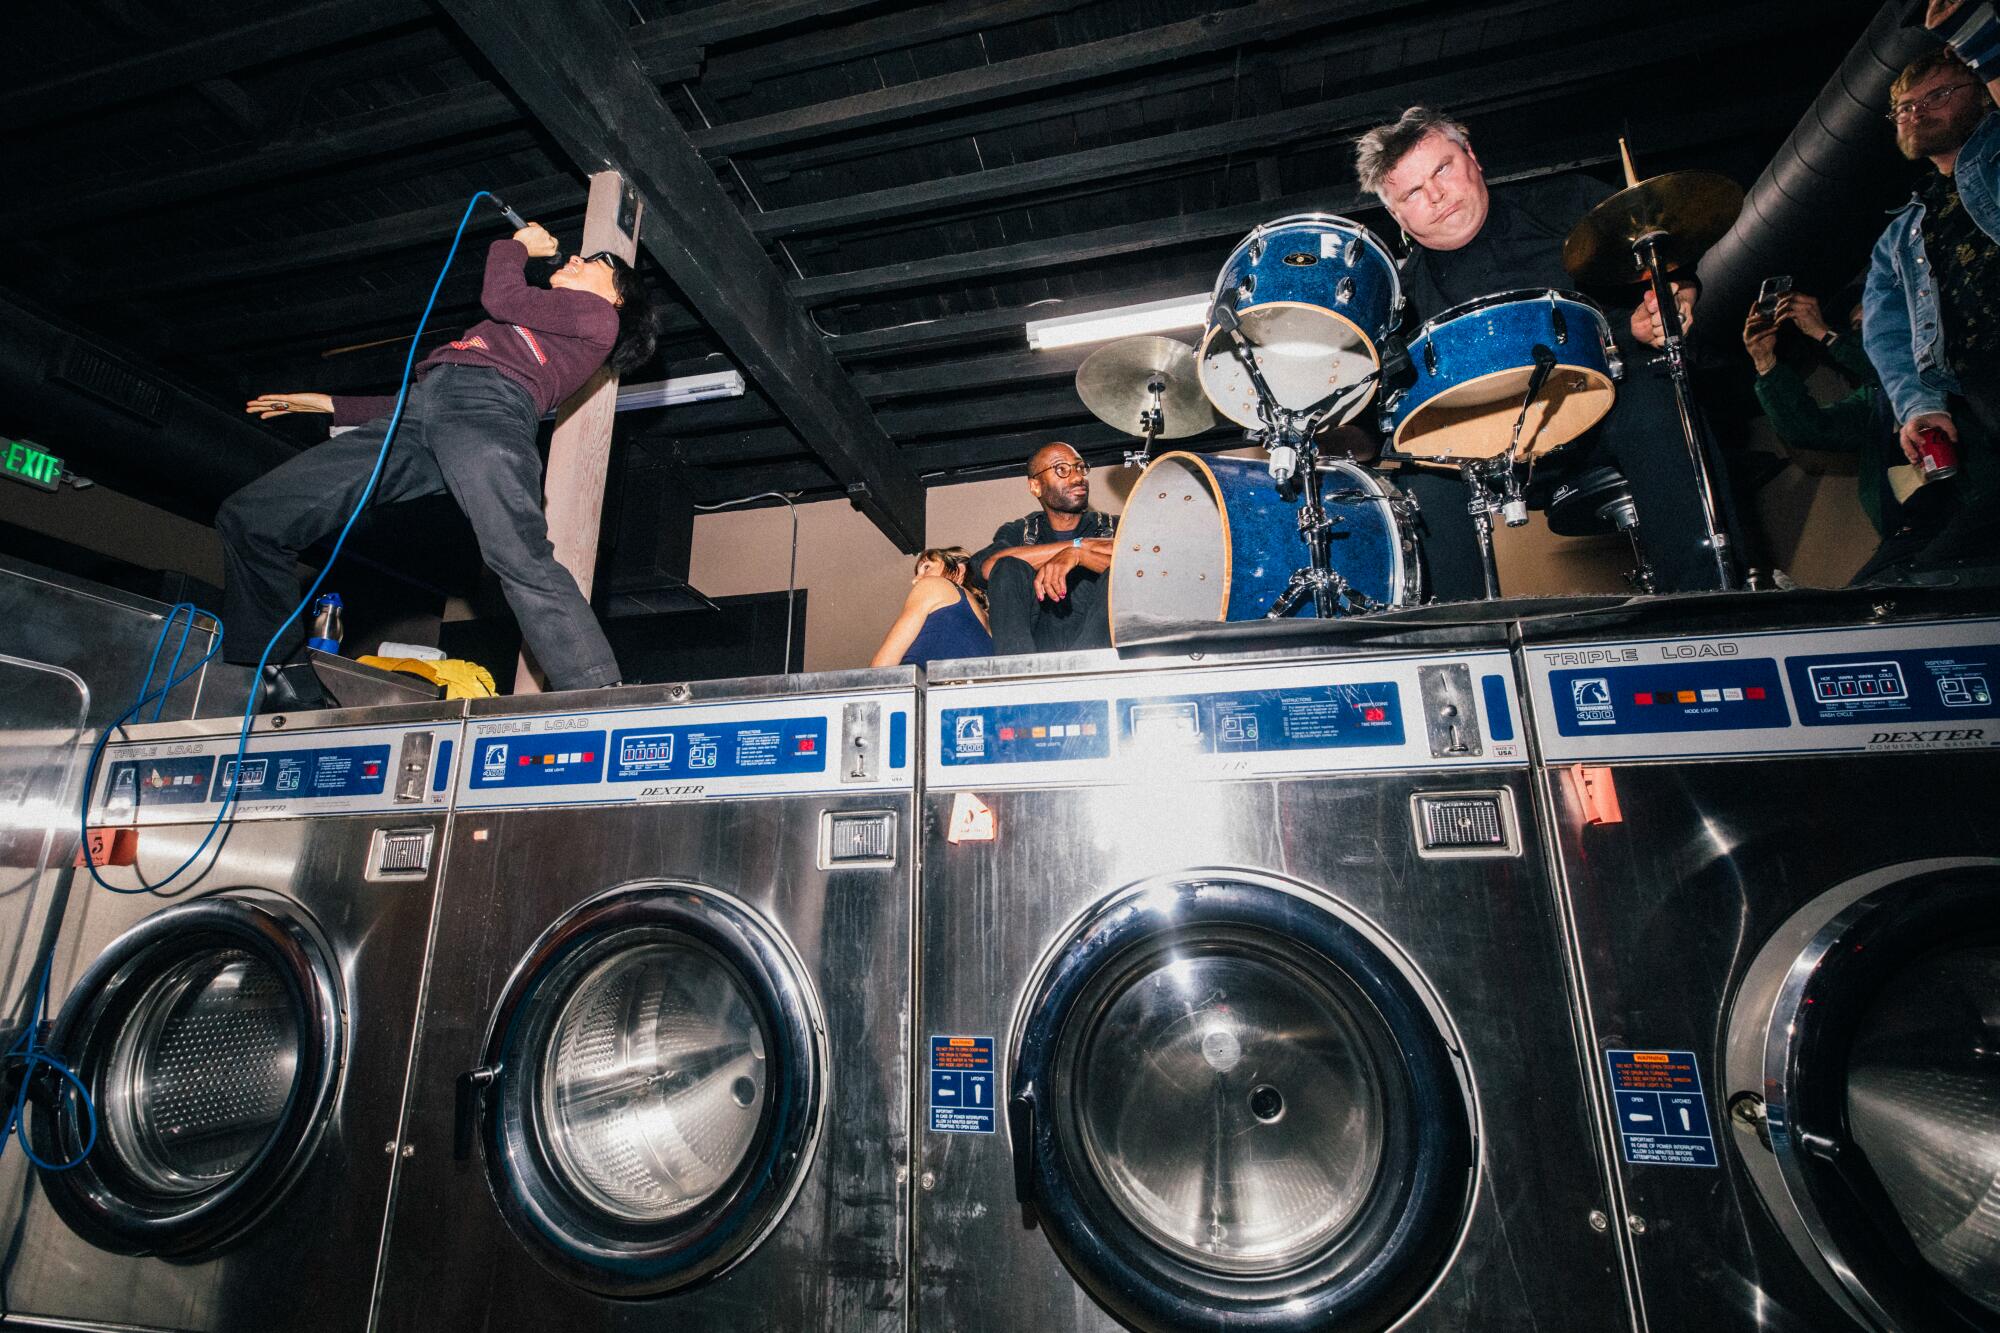 Musicians perform on top of a row of washing machines at a laundromat